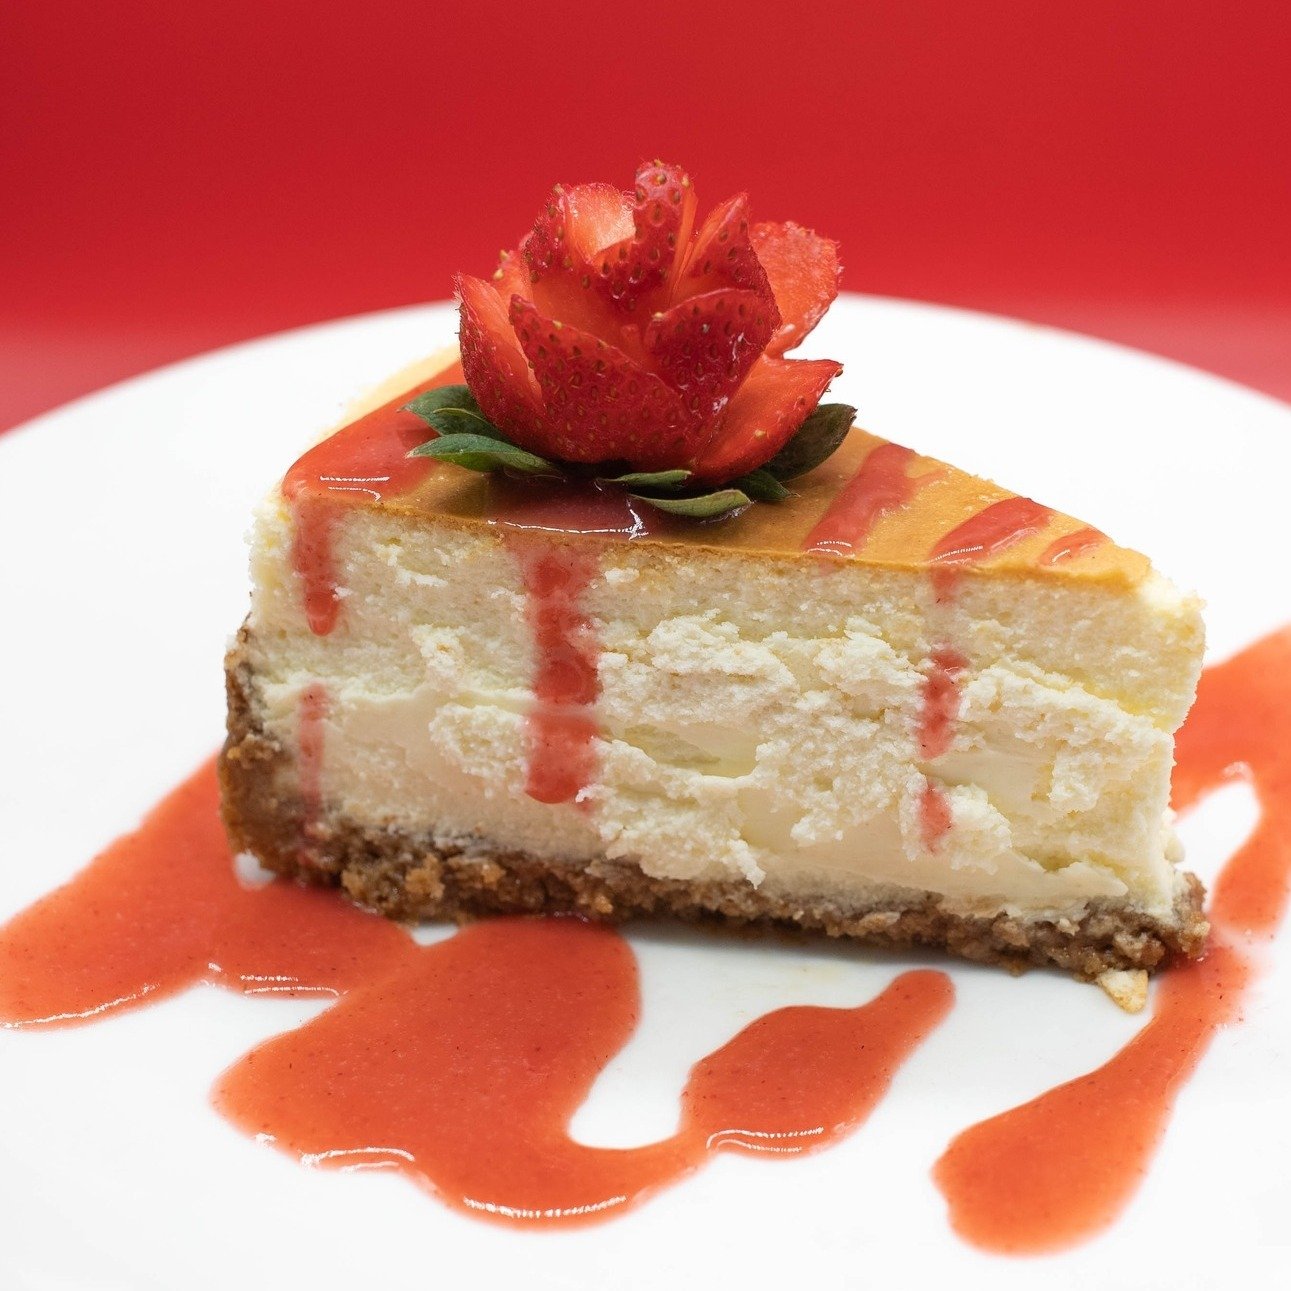 Napa Flats' Cheesecake is all about the grand finale &ndash; light, creamy, and waiting to be topped with your favorite melody of chocolate ganache, strawberry sauce, or caramel. What's your encore going to be? 🌟🍓🍰

#NapaFlats #NapaFlatsWoodFiredK